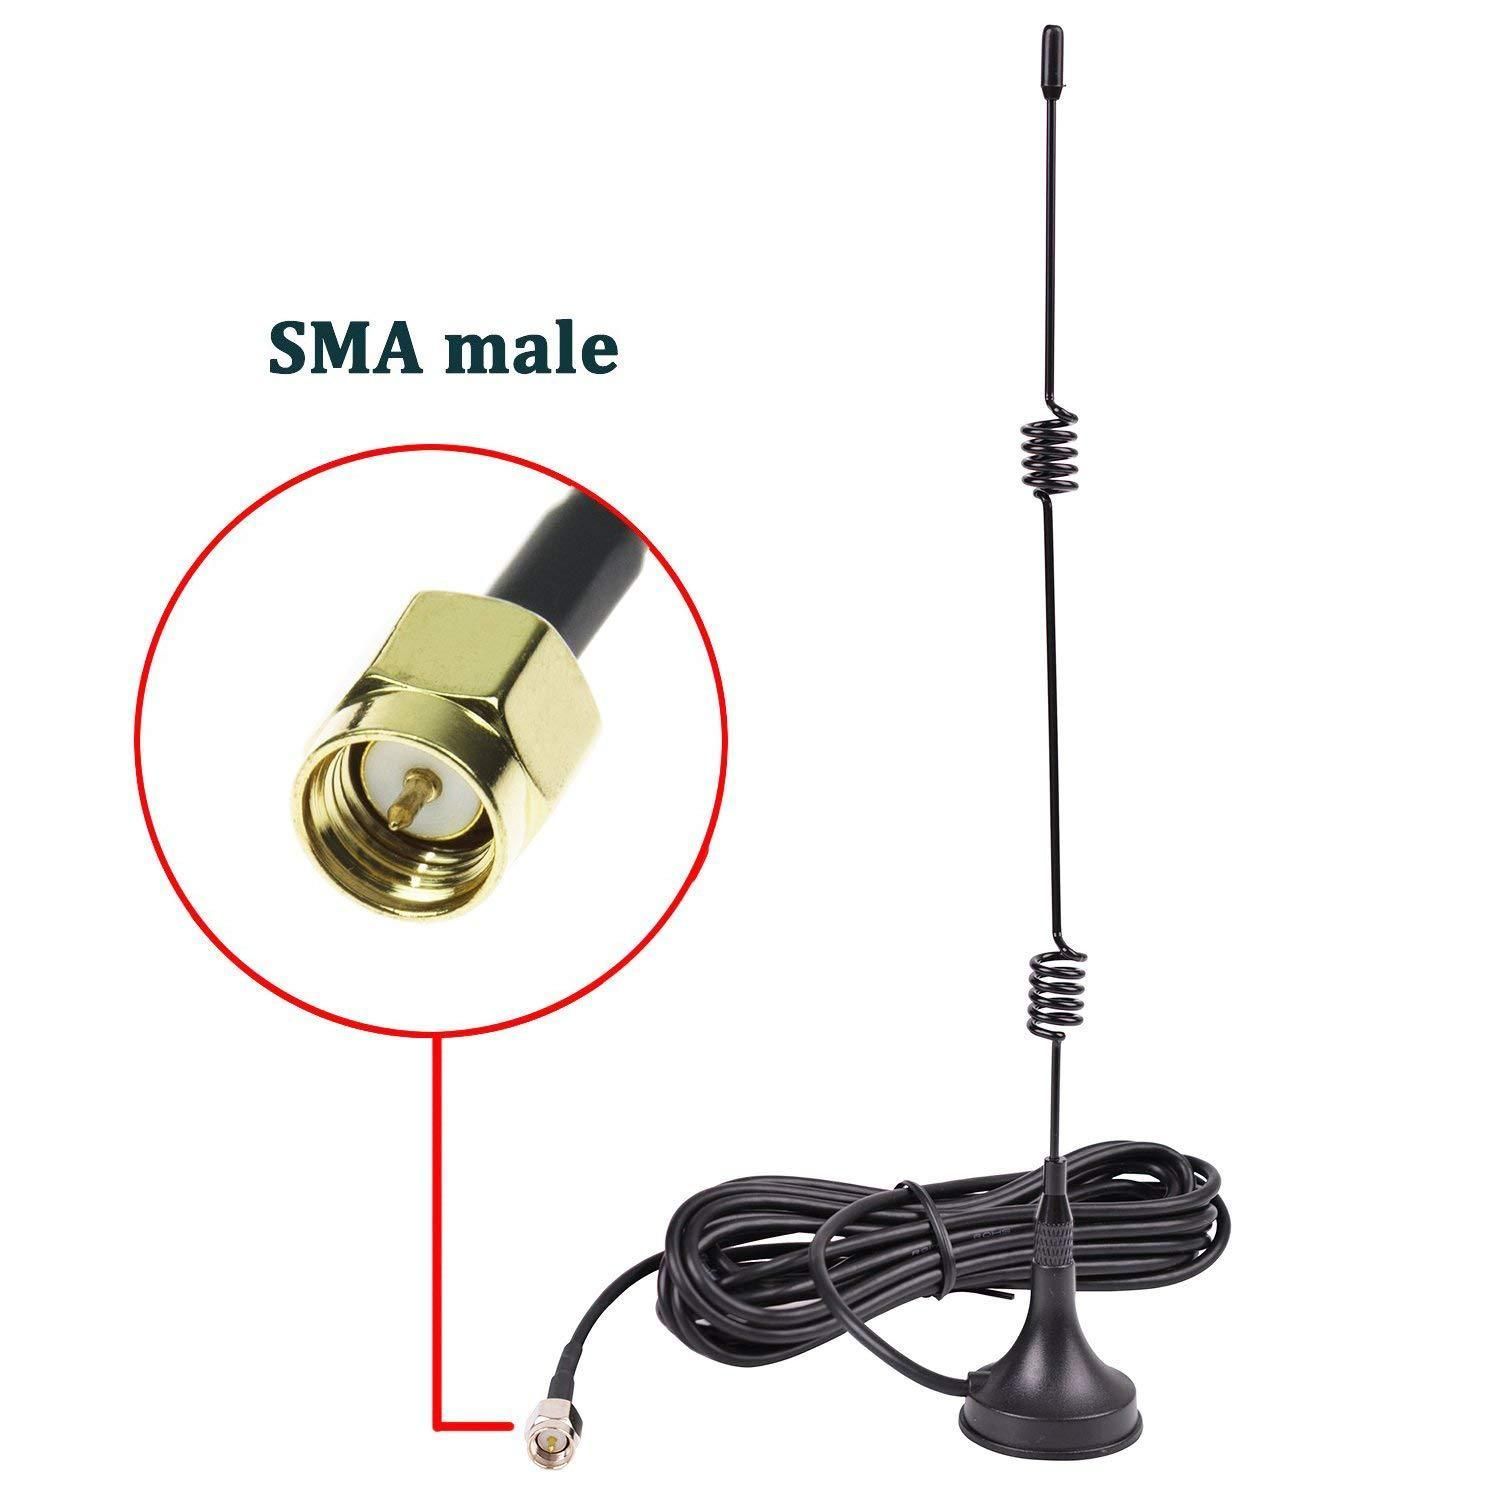 Bakeey-24G-Antenna-Wireless-Wifi-Network-Card-Router-Module-Antenna-RF-Radio-Frequency-Antenna-Magne-1721868